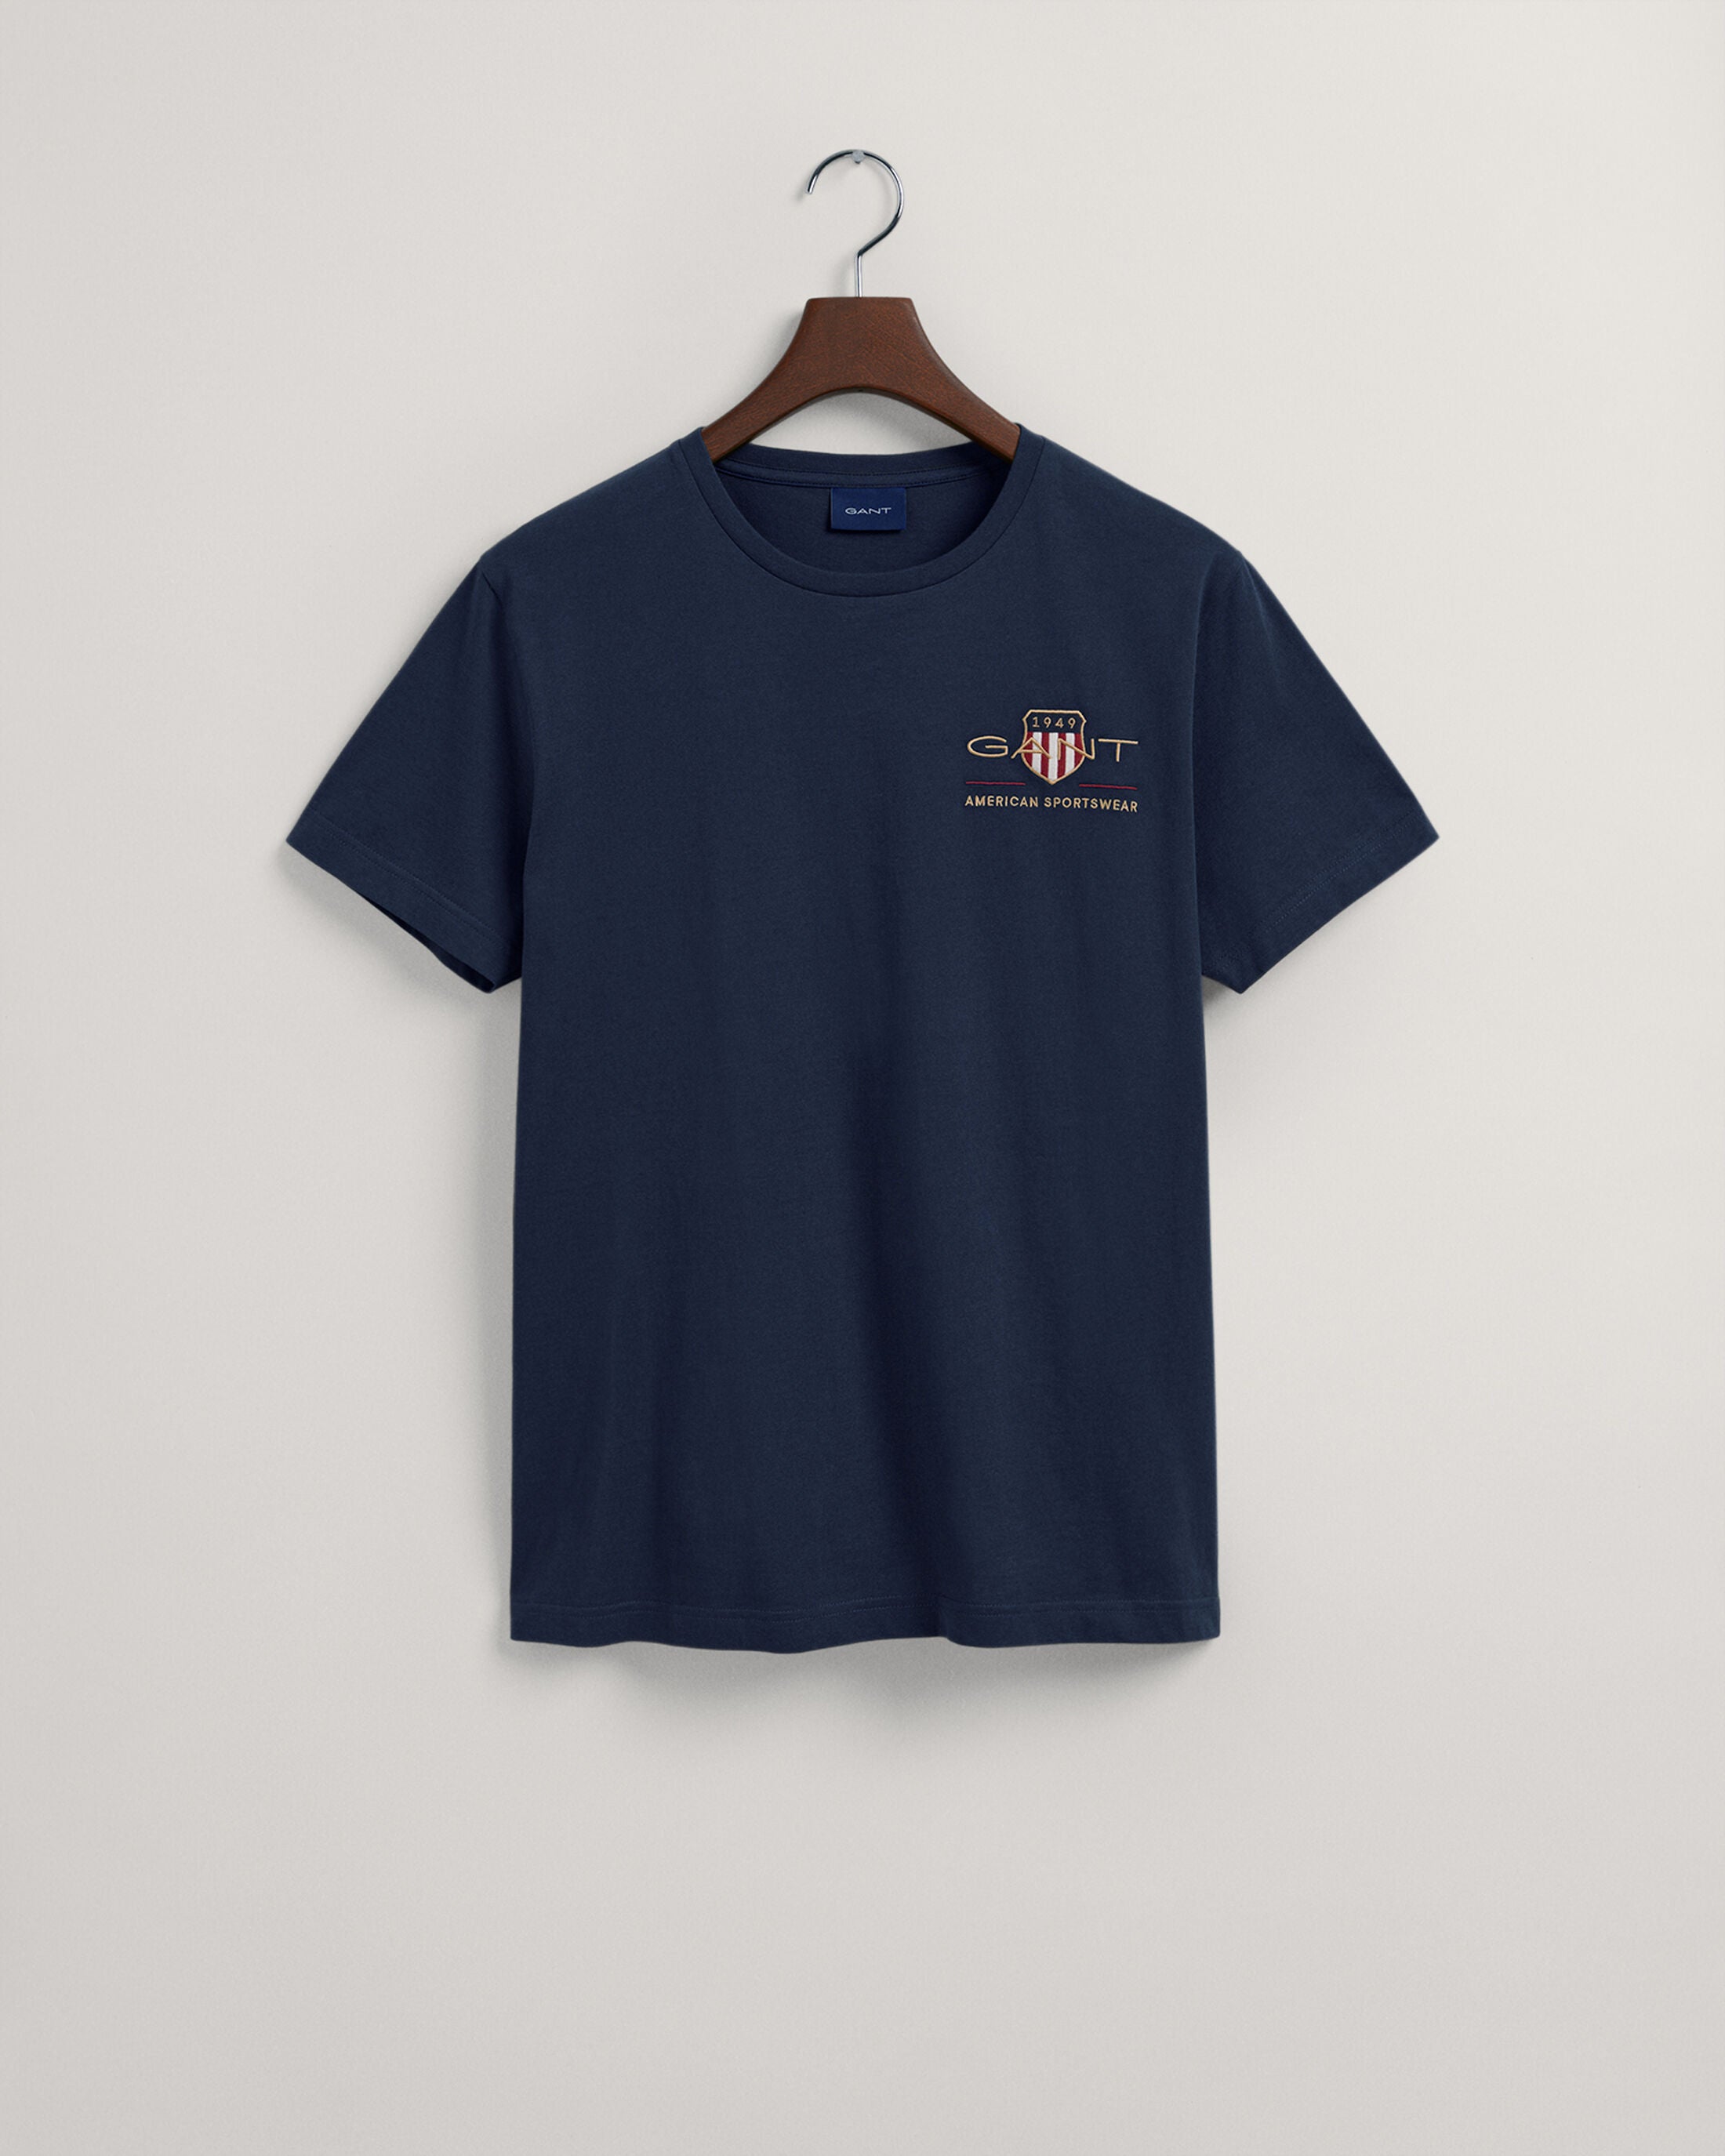 Gant Archive Shield Embroidery T Shirt